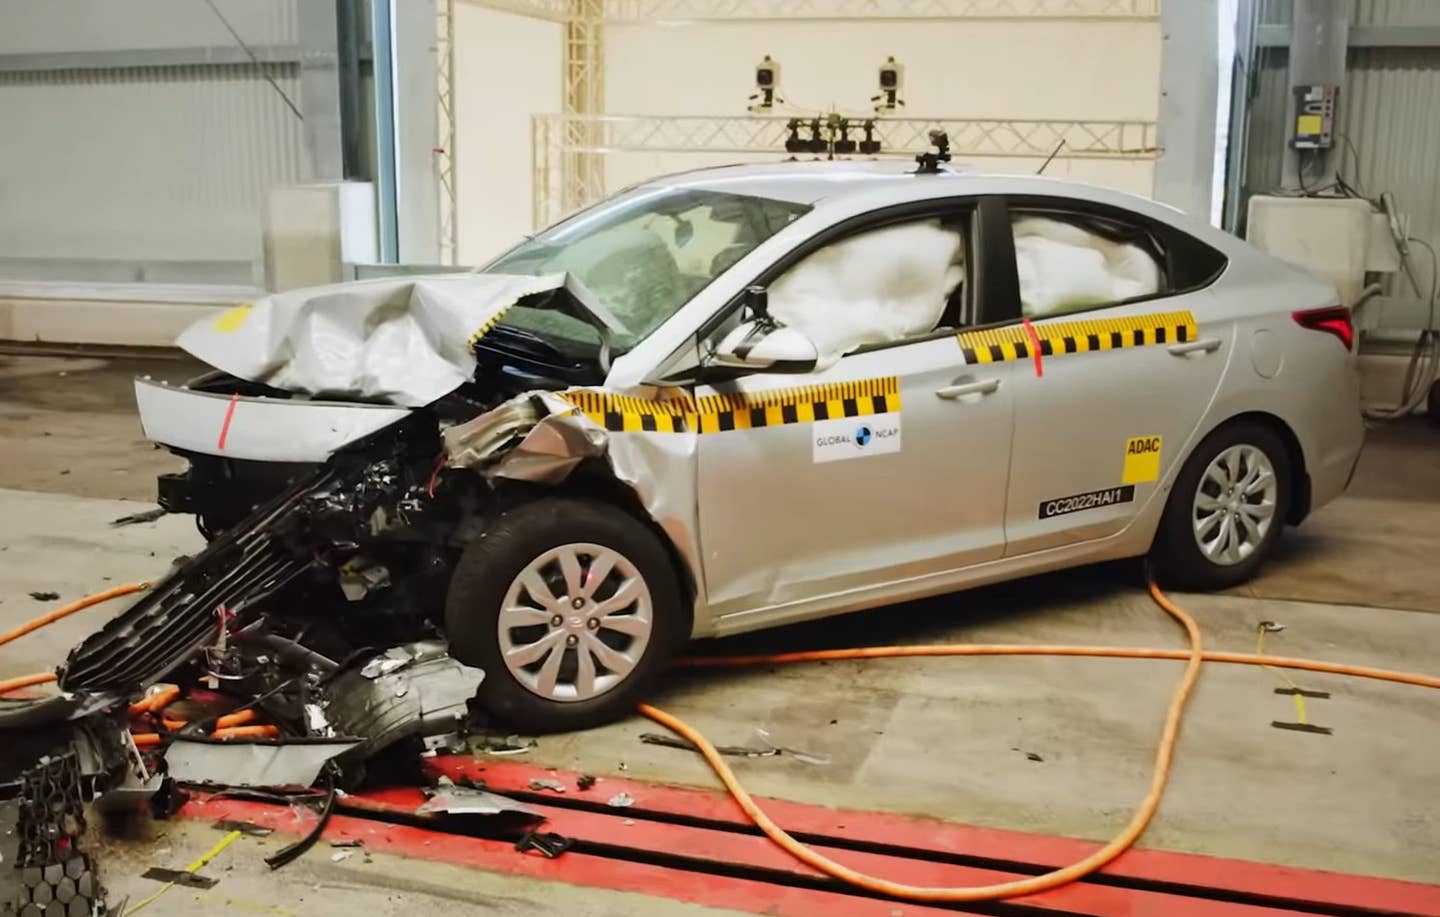 While the US market Hyundai Accent also shows heavy front-end damage, the occupant area is more intact, with the passengers inside much less likely to be seriously harmed.